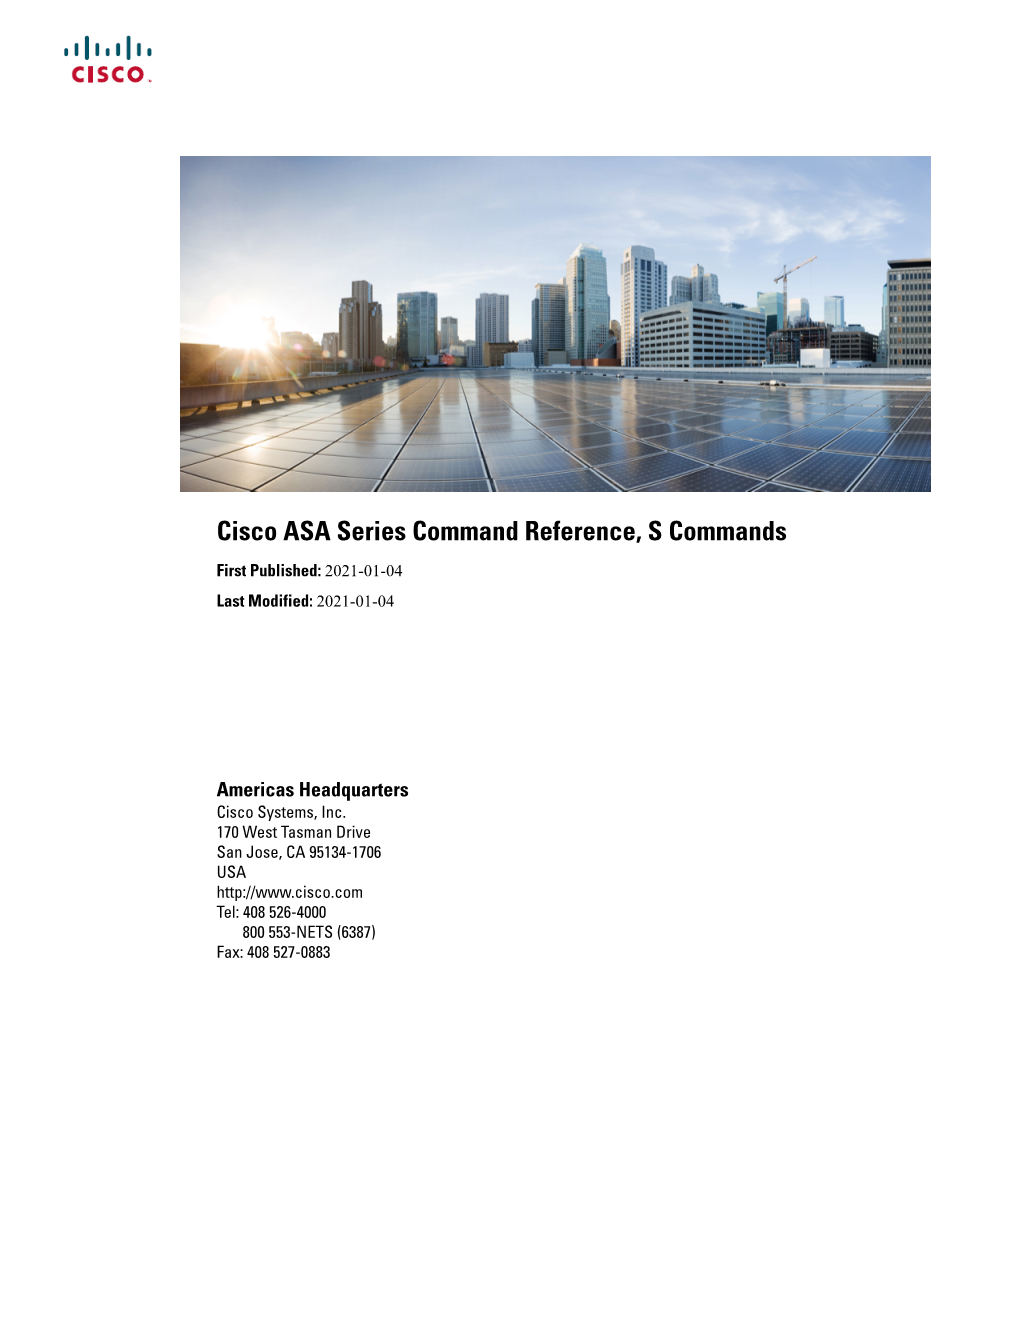 Cisco ASA Series Command Reference, S Commands